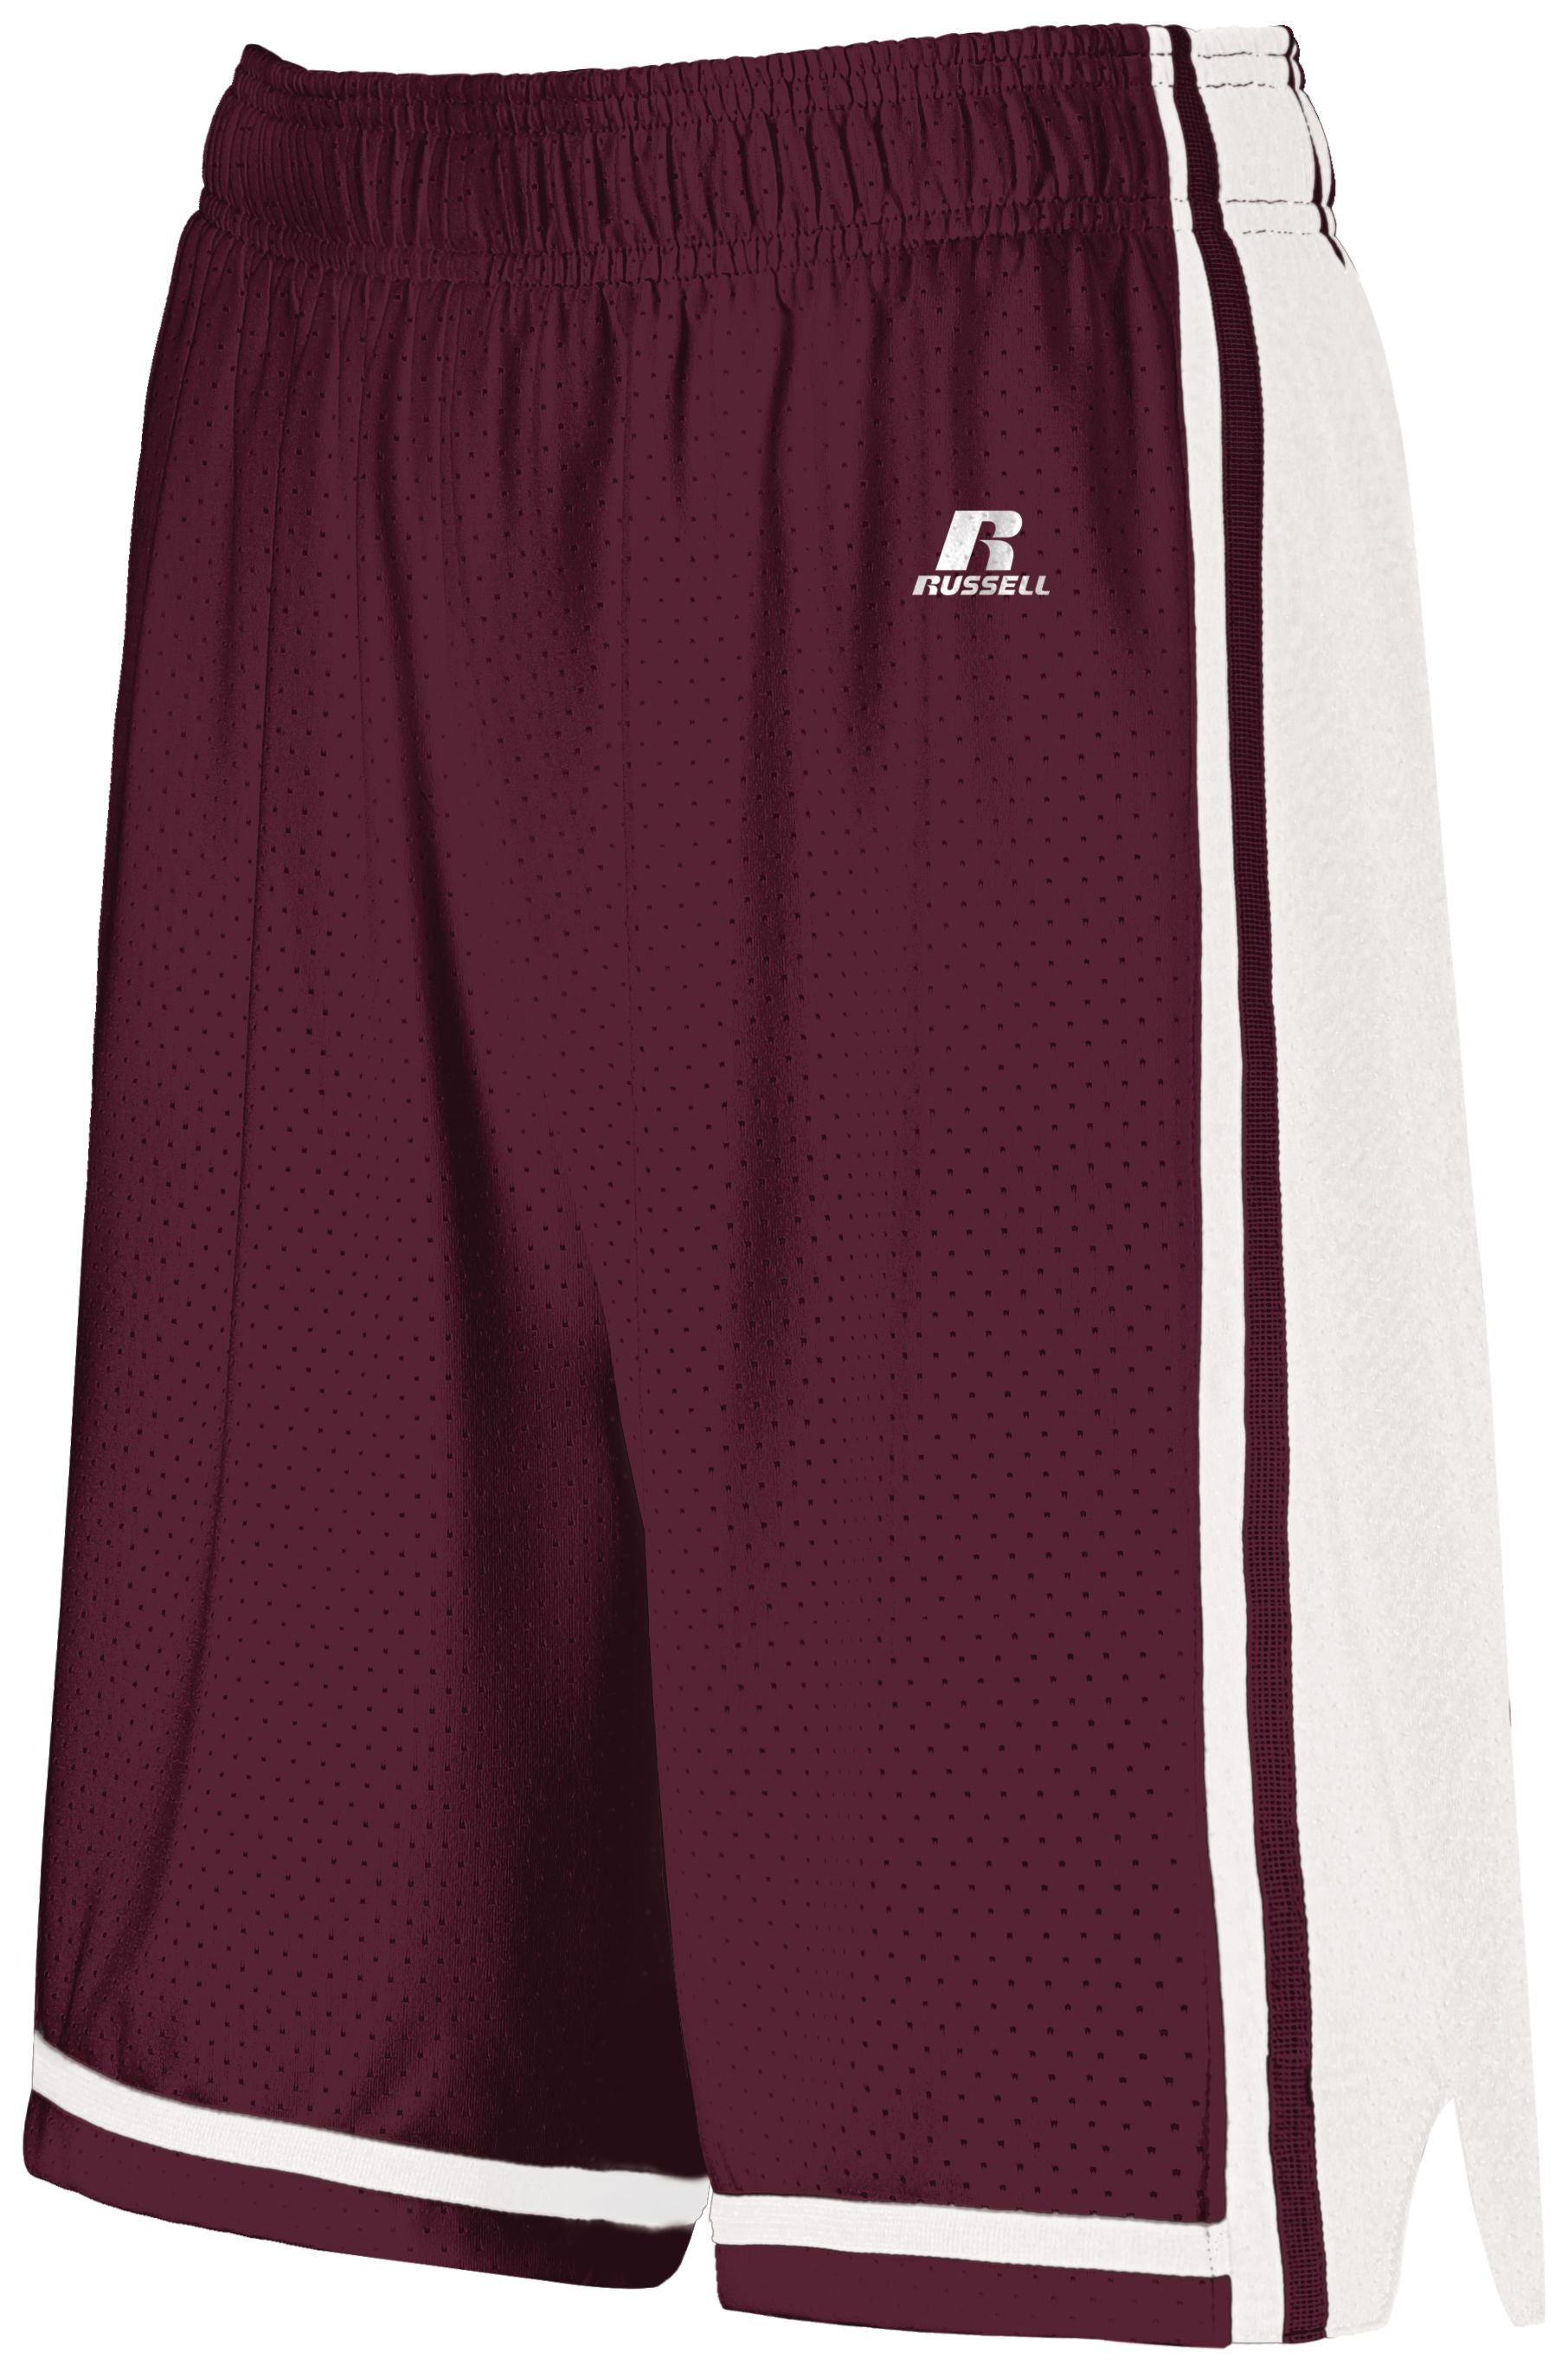 Russell Athletic Ladies Legacy Basketball Shorts in Maroon/White  -Part of the Ladies, Ladies-Shorts, Basketball, Russell-Athletic-Products, All-Sports, All-Sports-1 product lines at KanaleyCreations.com